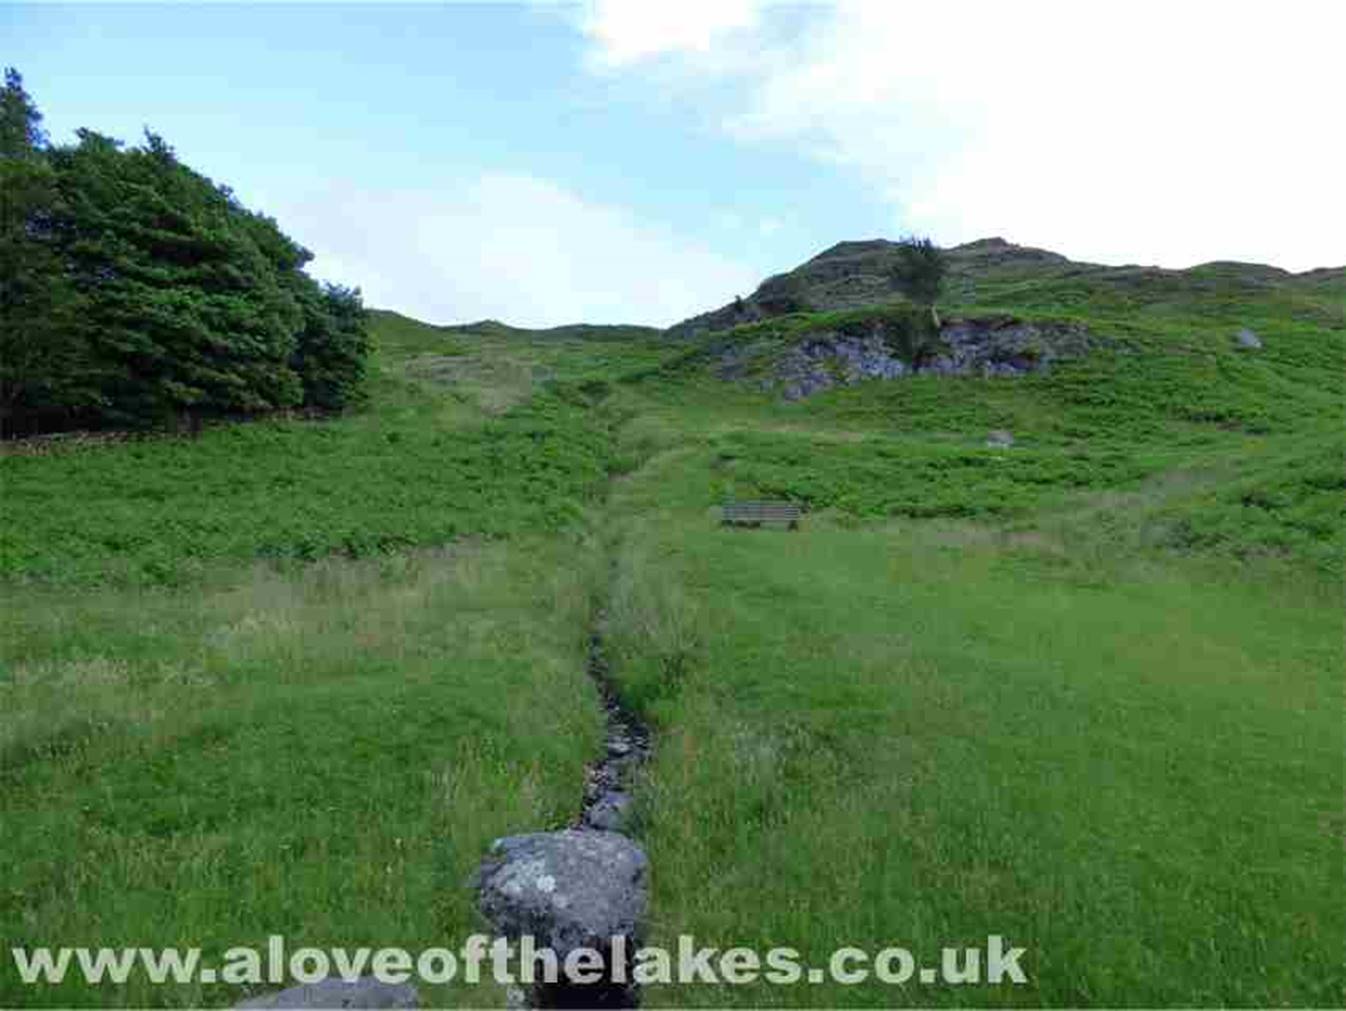 The path climbs gently past a bench and skirts the left hand side of the crags